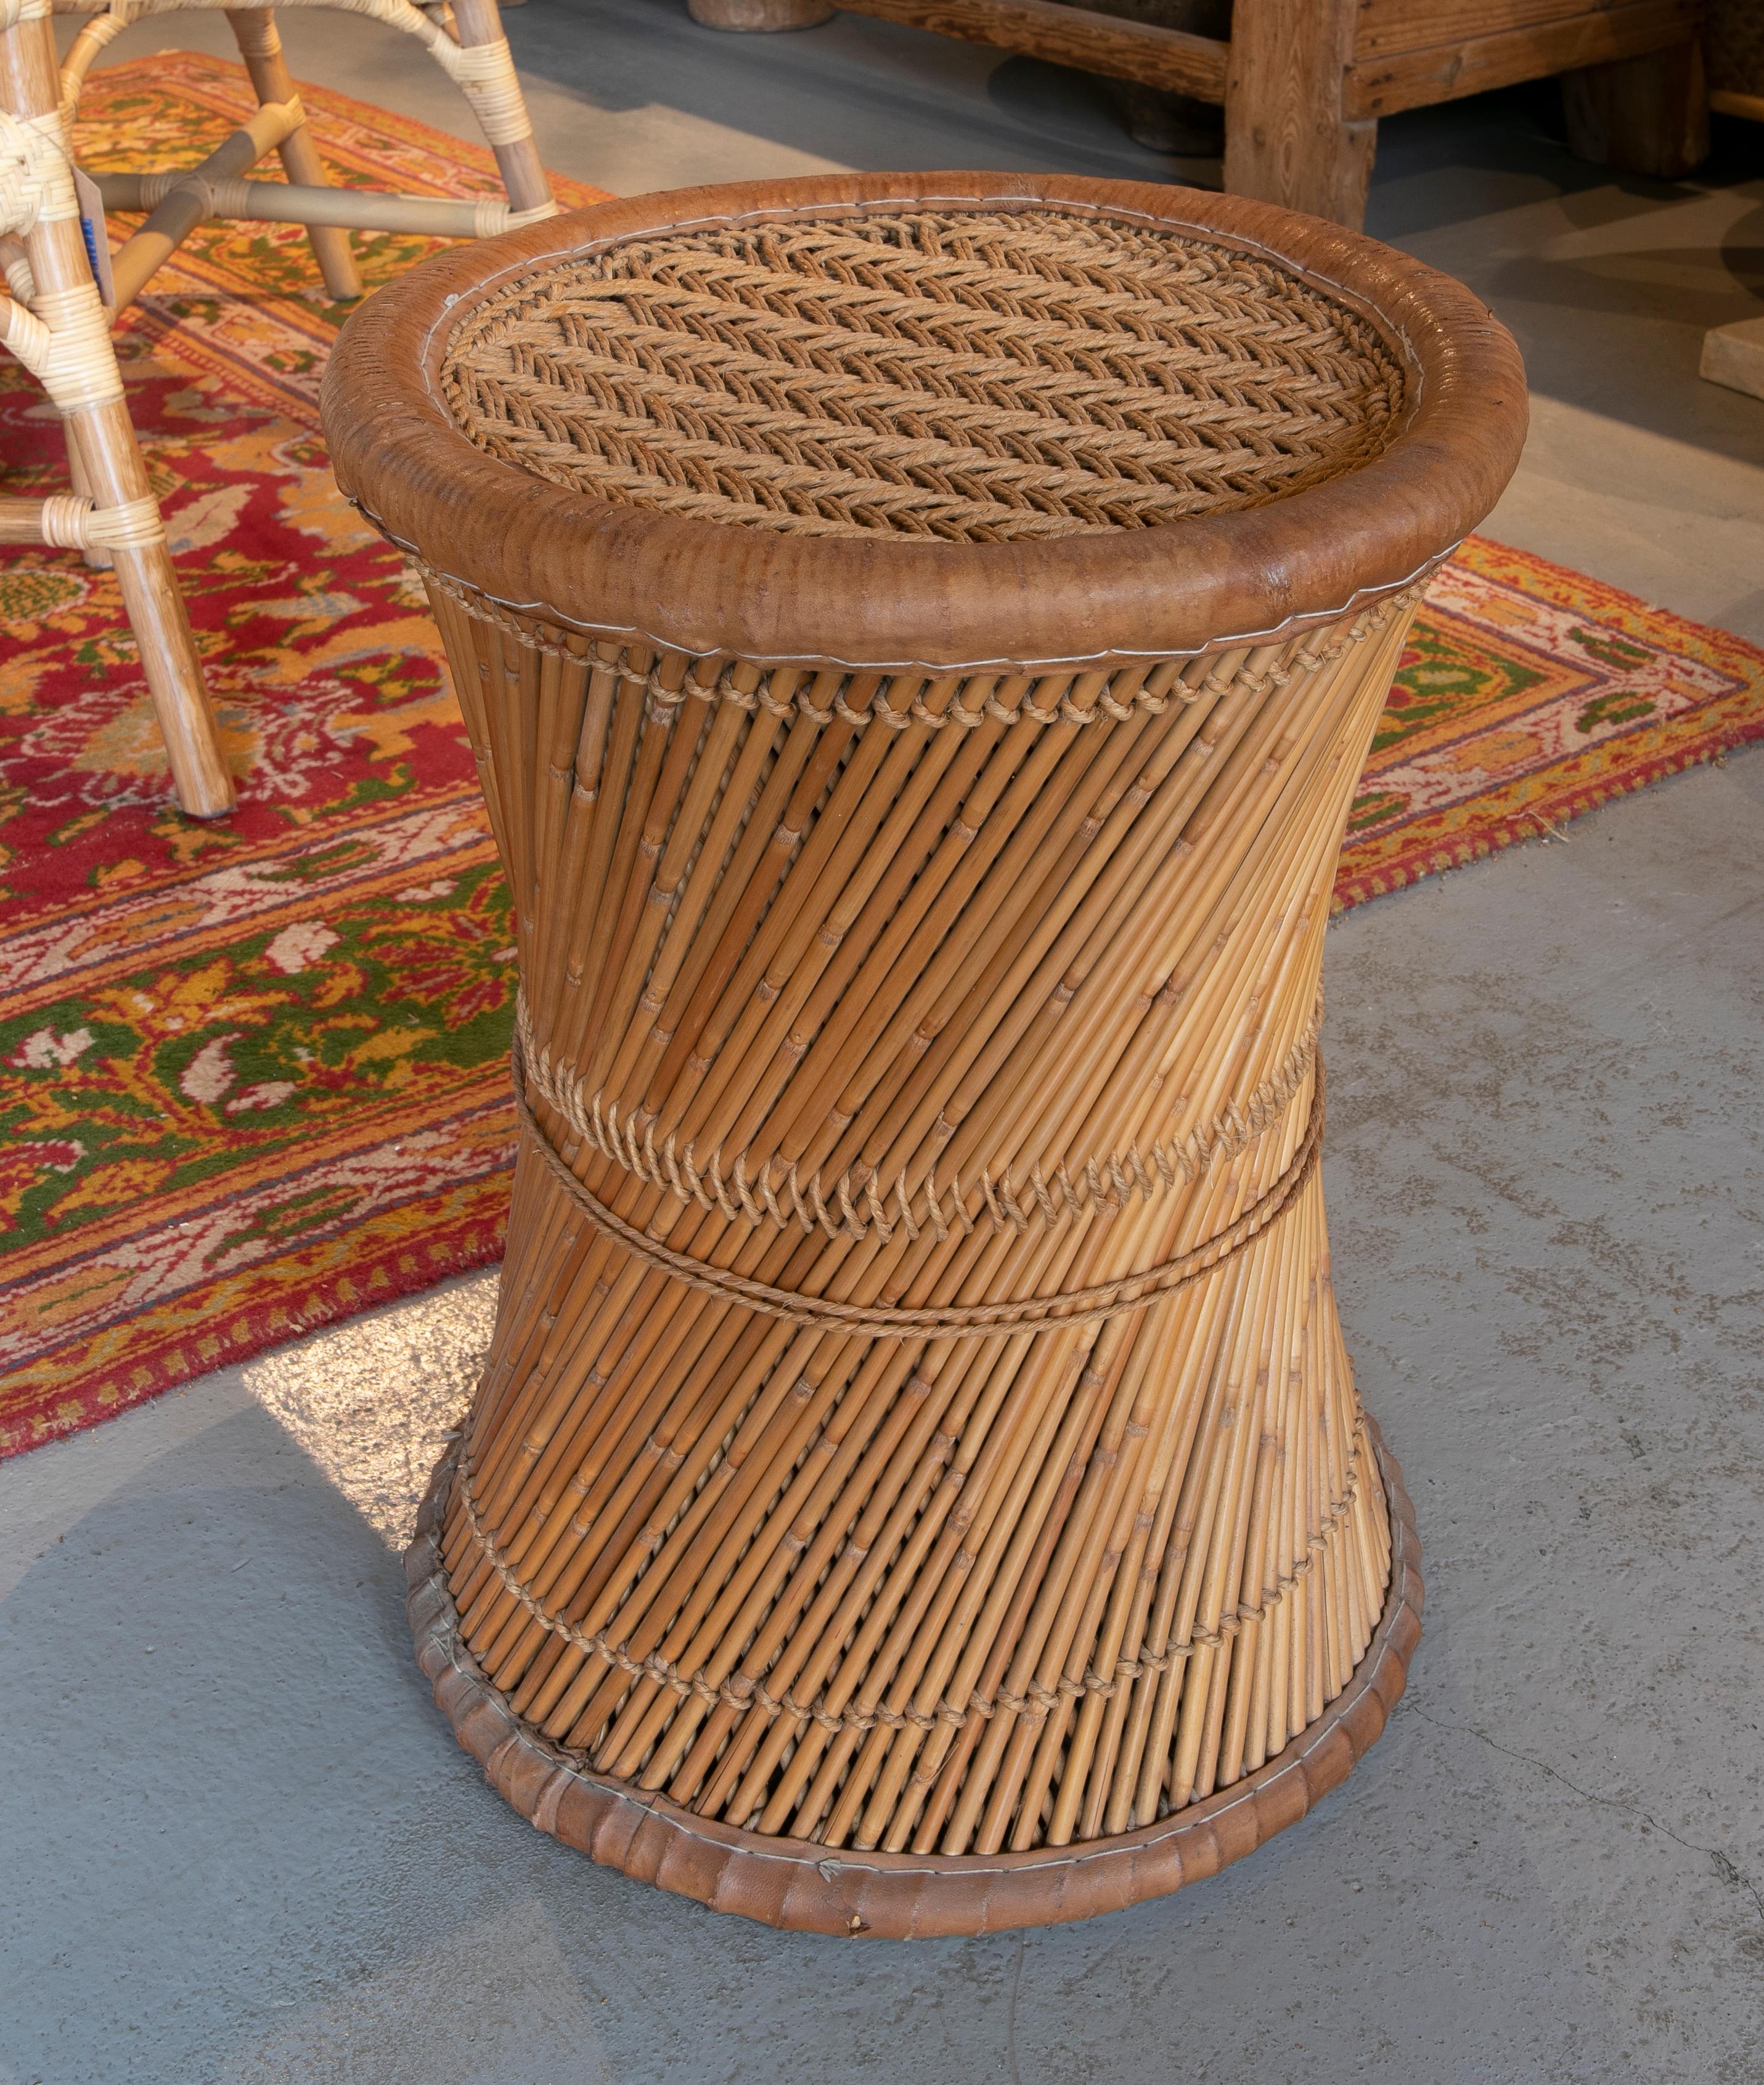 Spanish Wicker and Leather Stool  Handmade with Round Shape